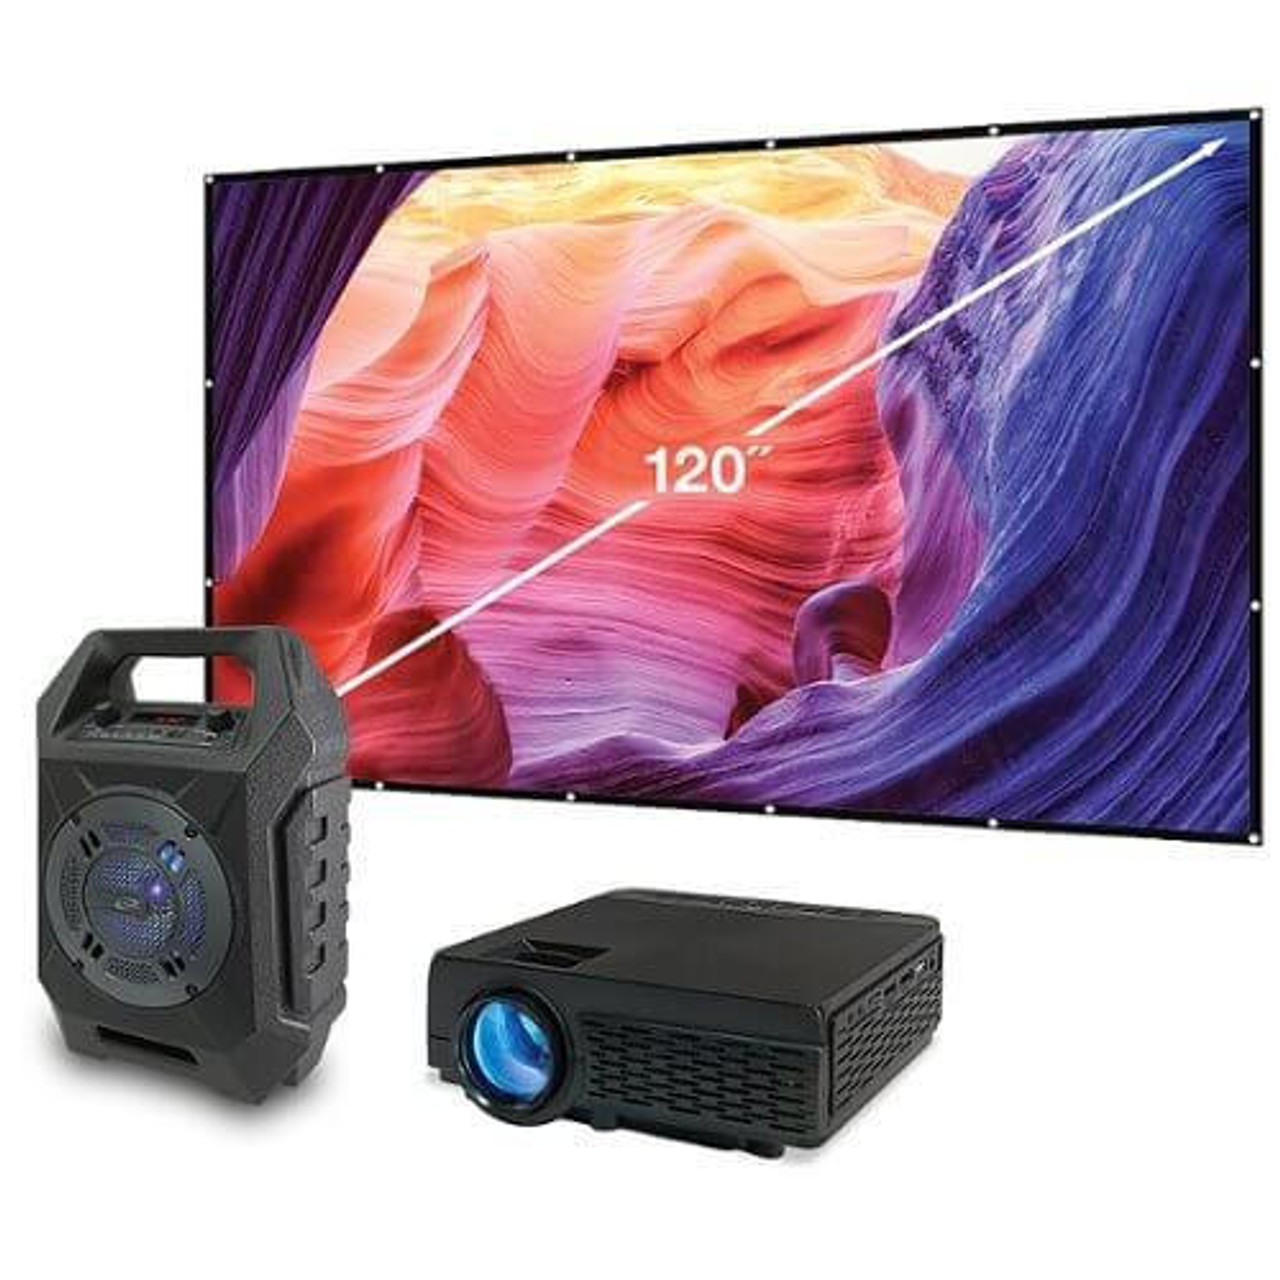 ILIVE Pop-Up Movie Theater Kit-  Projector, Bluetooth speaker & 120" diagonal screen 